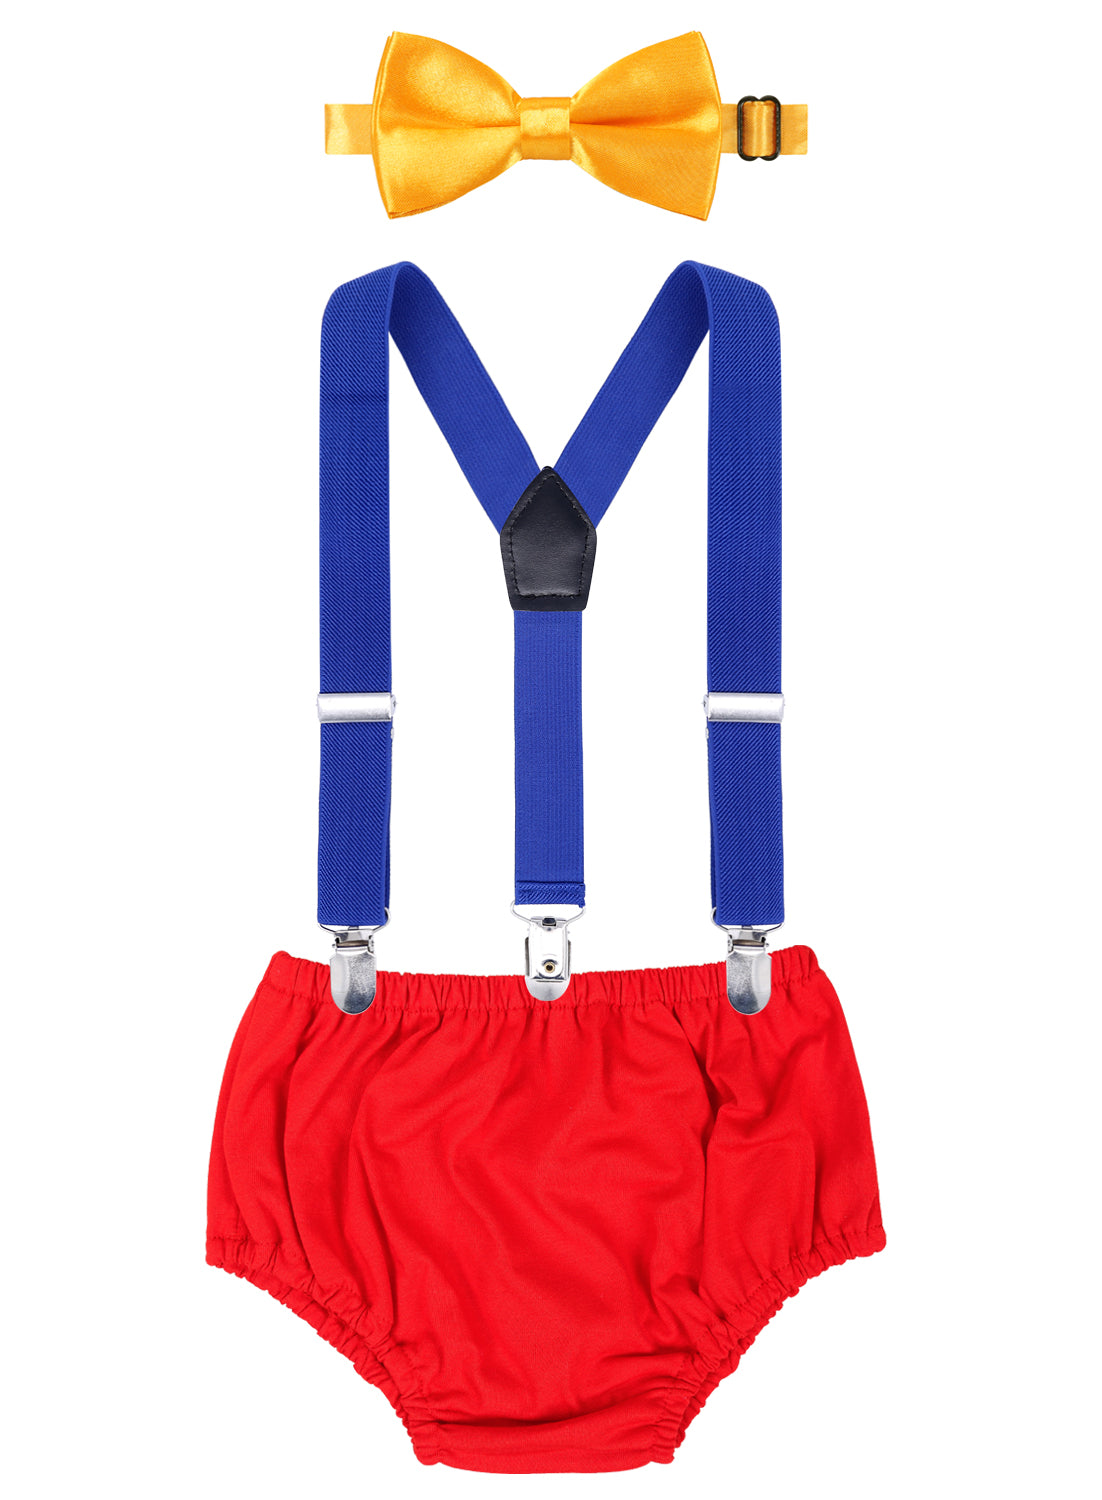 Boy's Cake Smash Costumes Combo including Adjustable Bowtie, Elastic Suspender and Bloomers Set, BD049